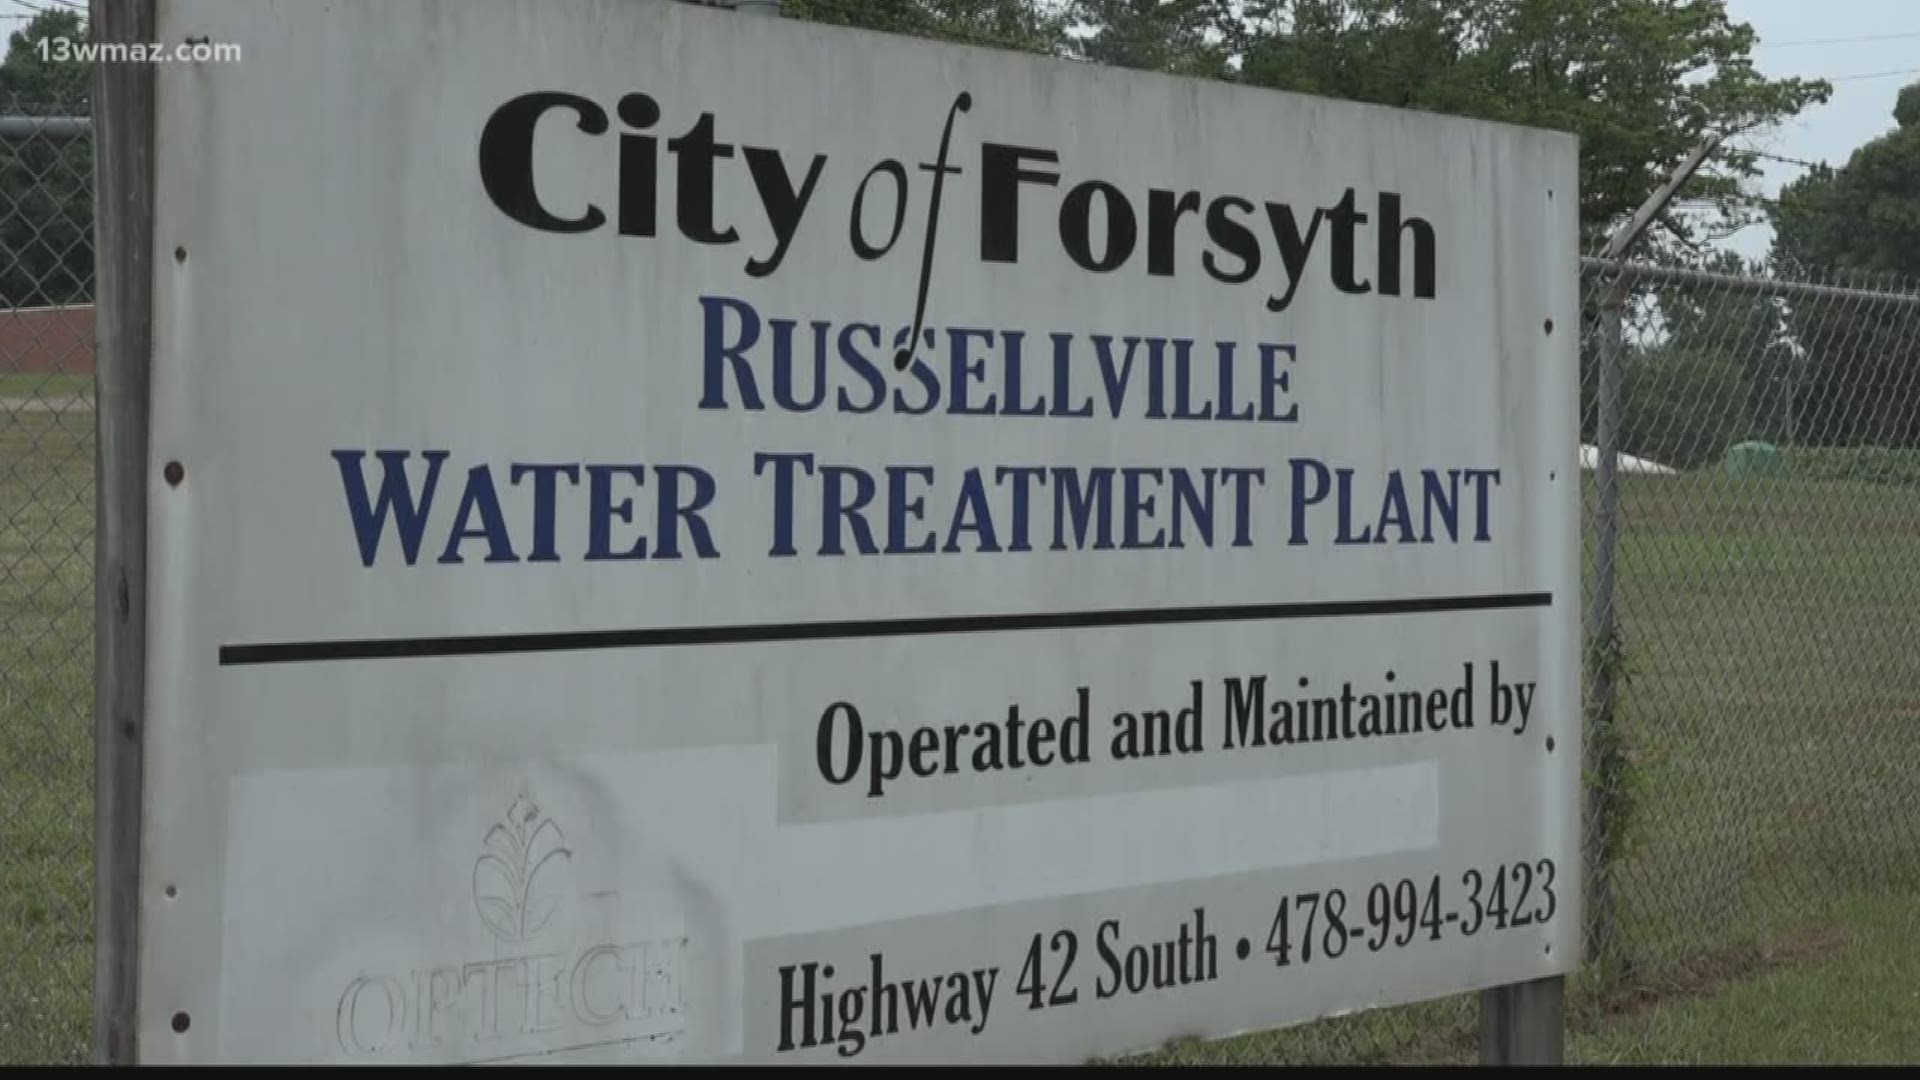 Despite a rainy forecast, drought is still a long-term concern in Central Georgia this summer. Ensley Nichols tells us the city of Forsyth is trying to be proactive by asking people to cut back on their water use.